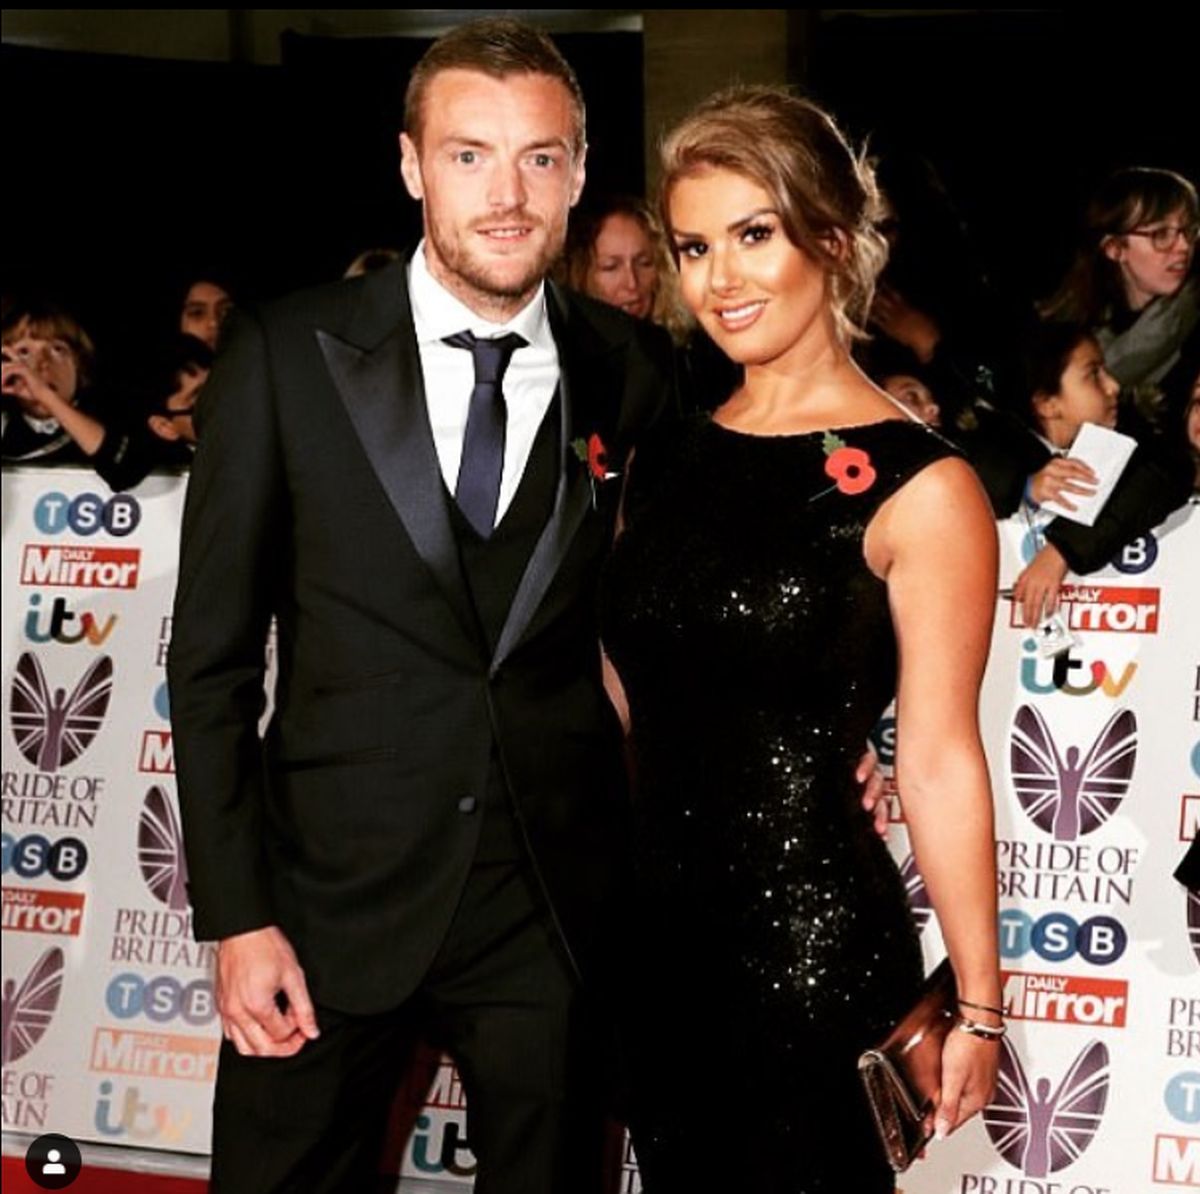 Leicester City and England striker Jamie Vardy with wife Rebekah Vardy